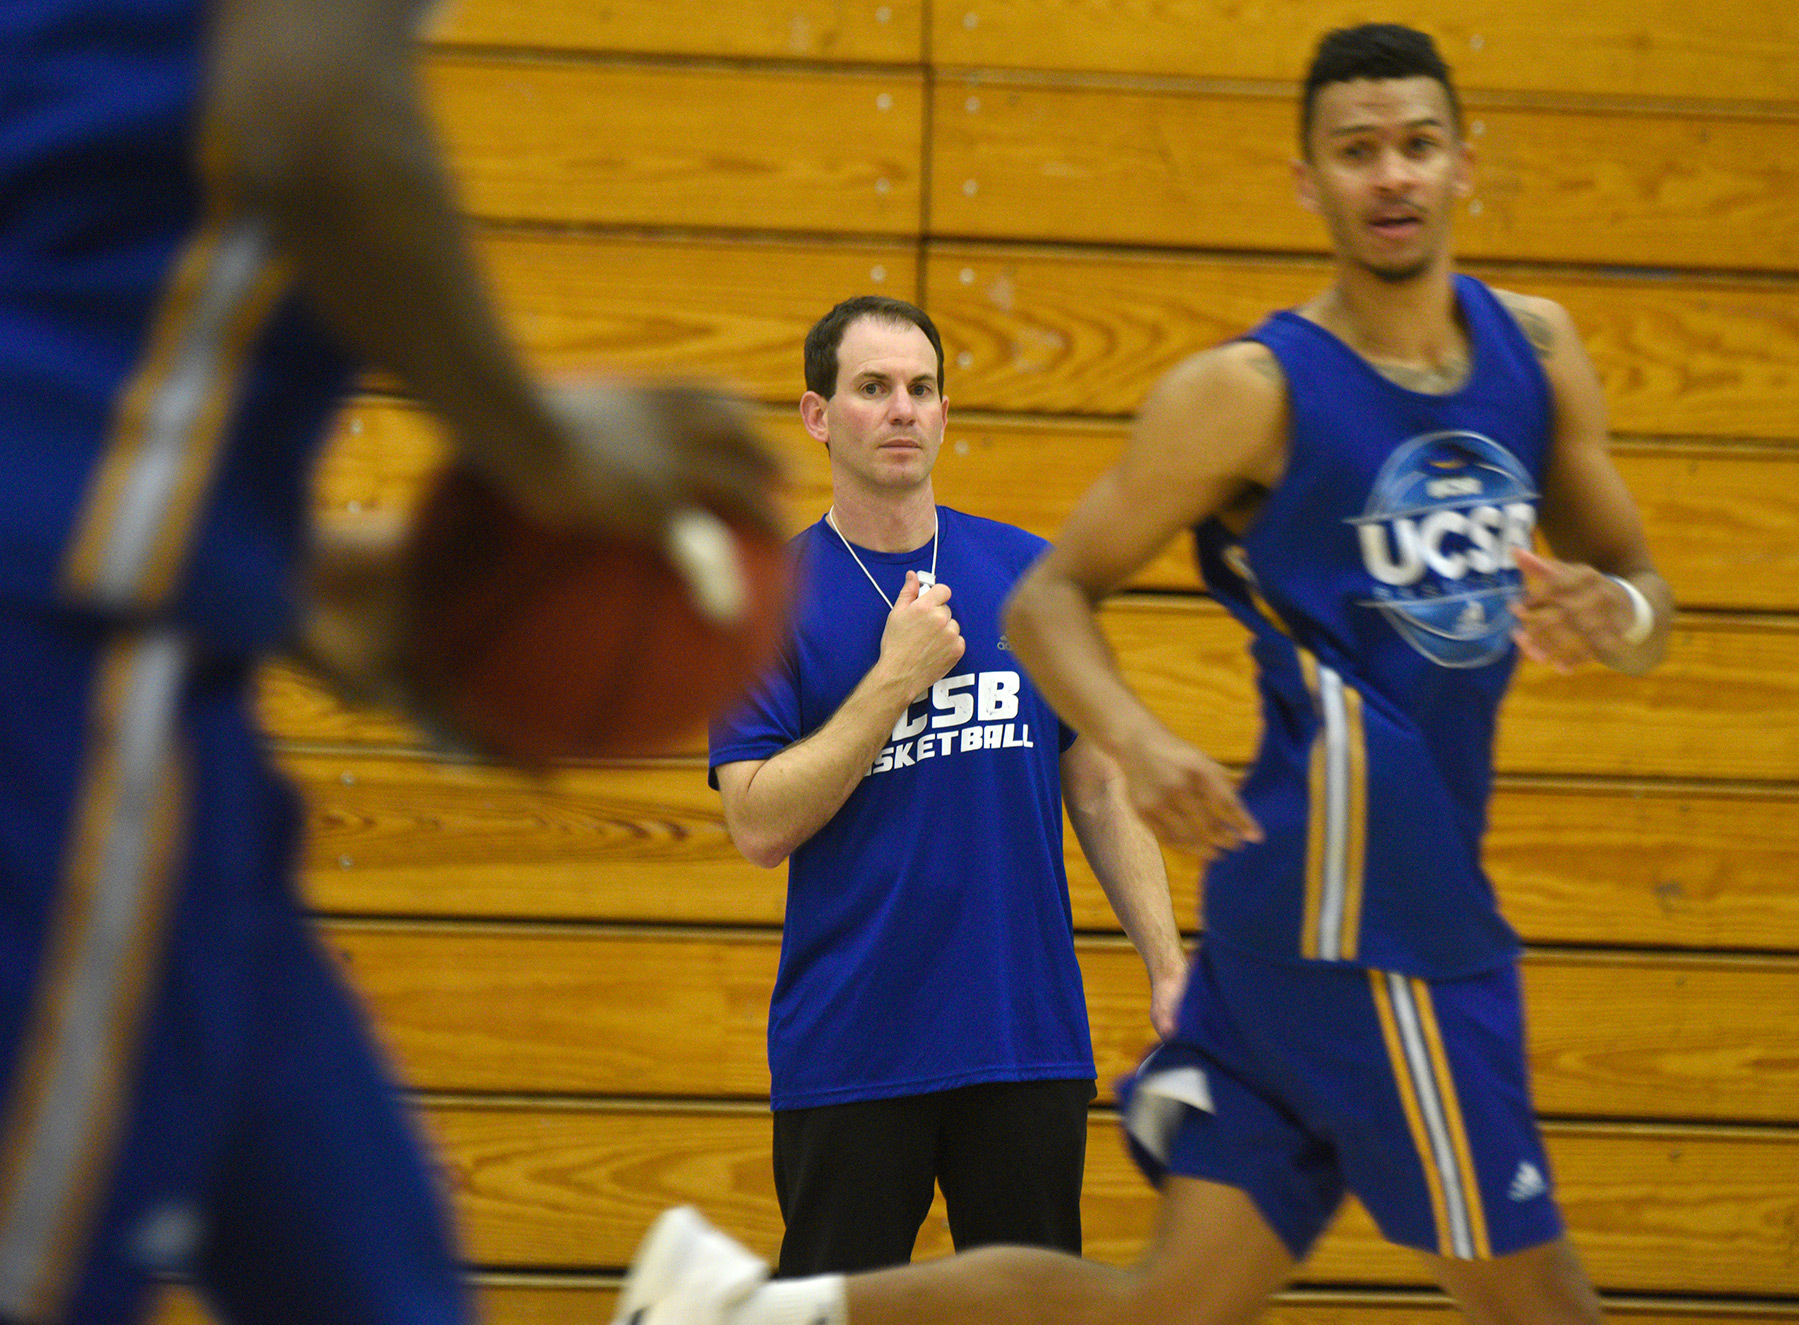 UCSB Basketball Takes ‘Stand Against Racial Injustice’ in PSA The